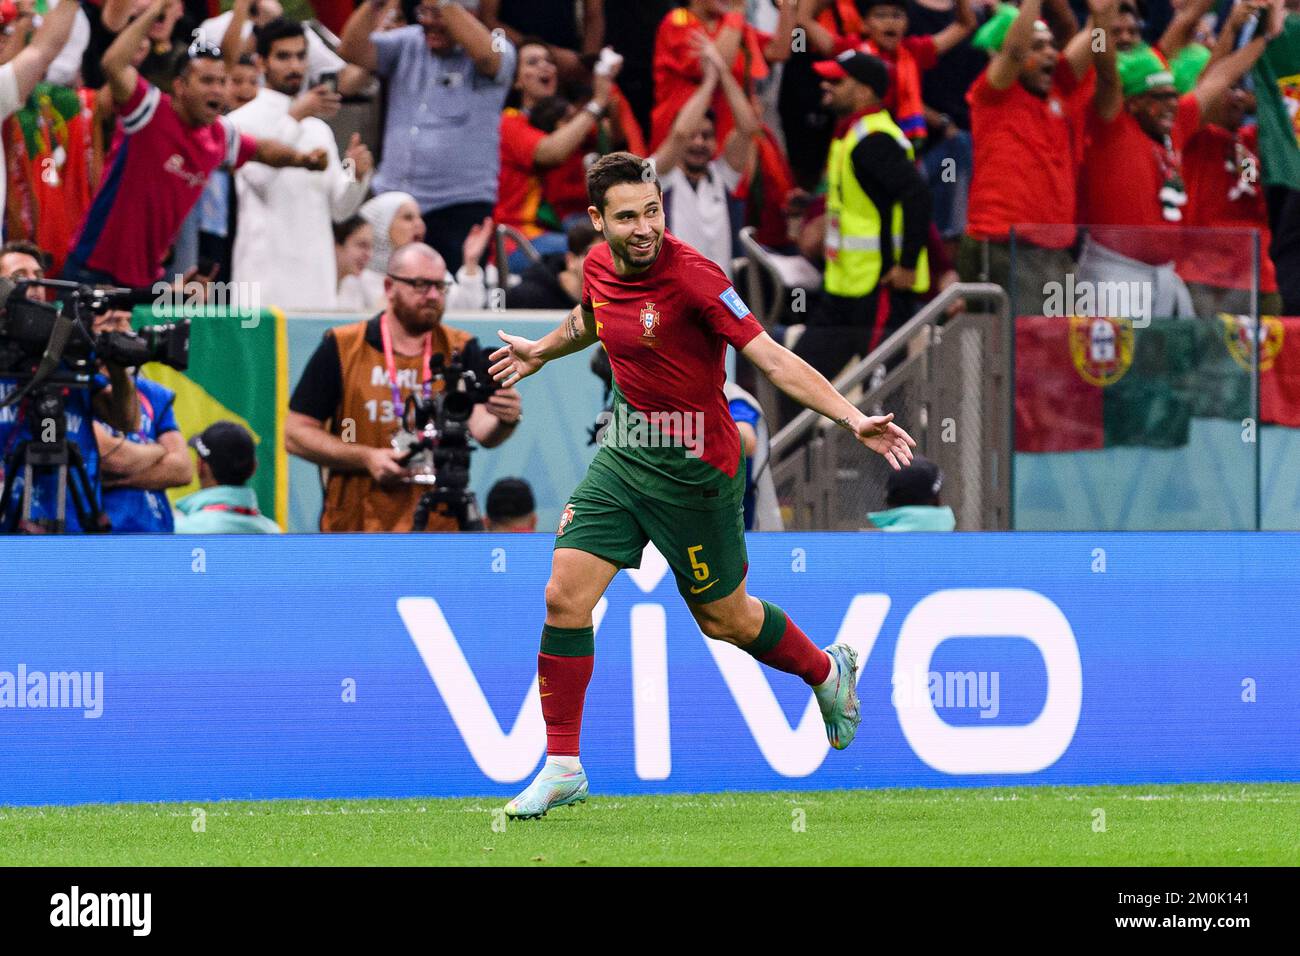 Lusail, Qatar. 06th Dec, 2022. Estadio Lusail Raphael Guerreiro of Portugal celebrates after scoring a goal (4-0) during the match between Portugal and Switzerland, valid for the round of 16 of the World Cup, held at the Estadio Nacional de Lusail in Lusail, Qatar. (Marcio Machado/SPP) Credit: SPP Sport Press Photo. /Alamy Live News Stock Photo